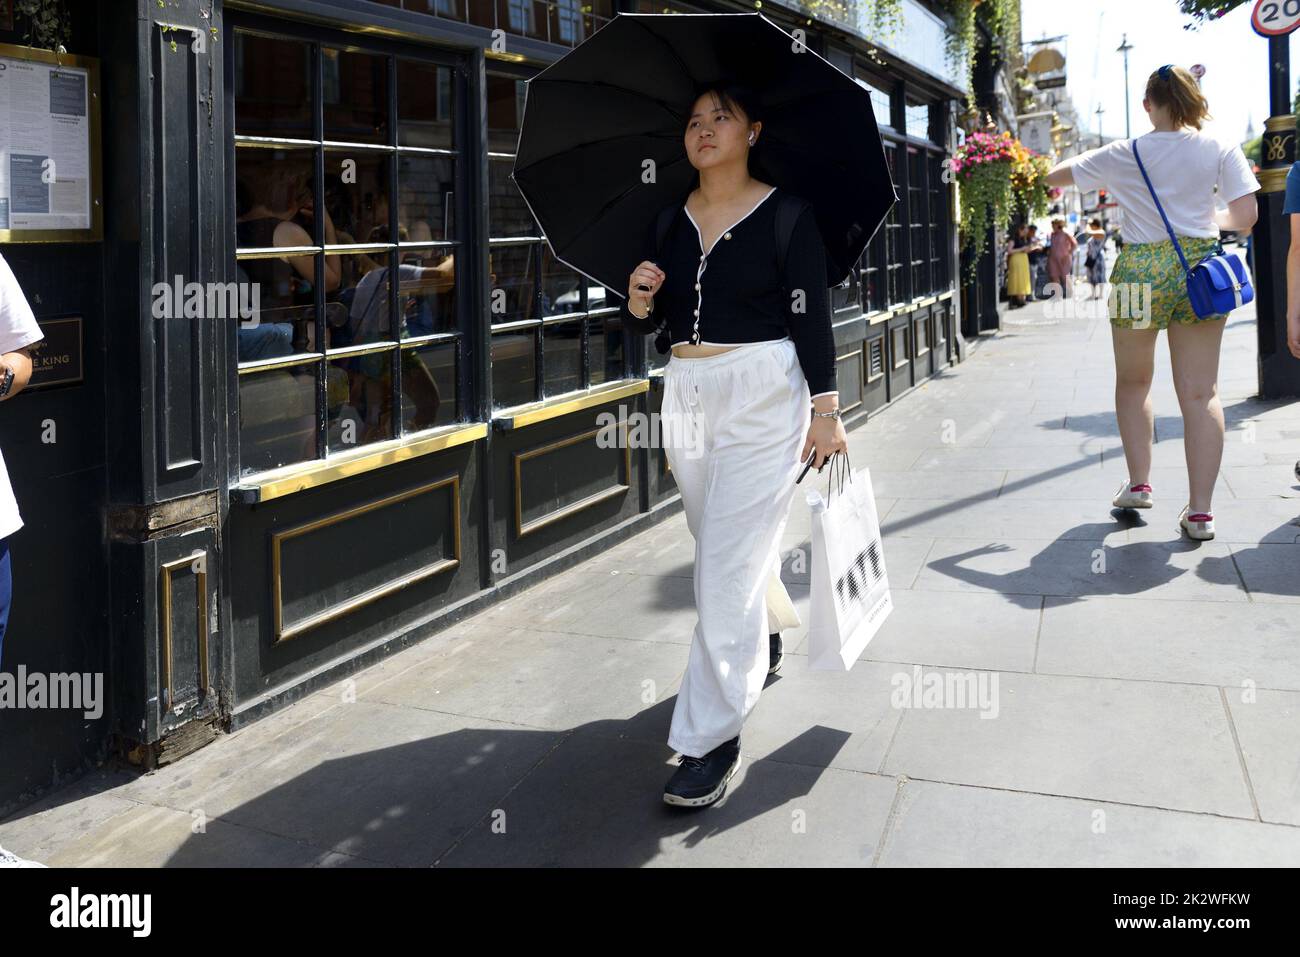 London, England, UK. Asian woman with an unbrella on a hot sunny day Stock Photo